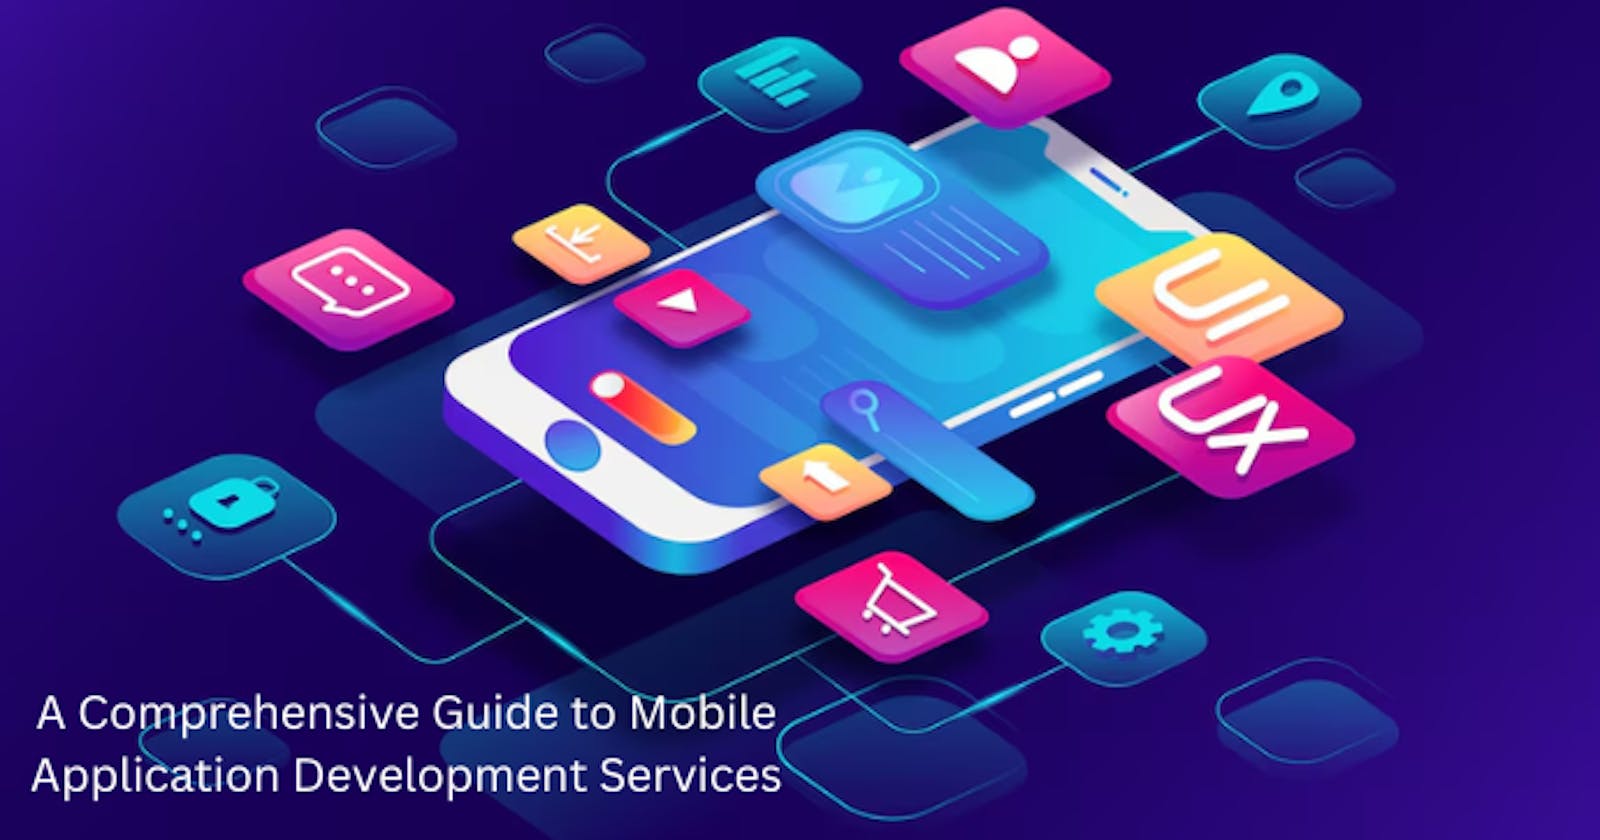 A Comprehensive Guide to Mobile Application Development Services